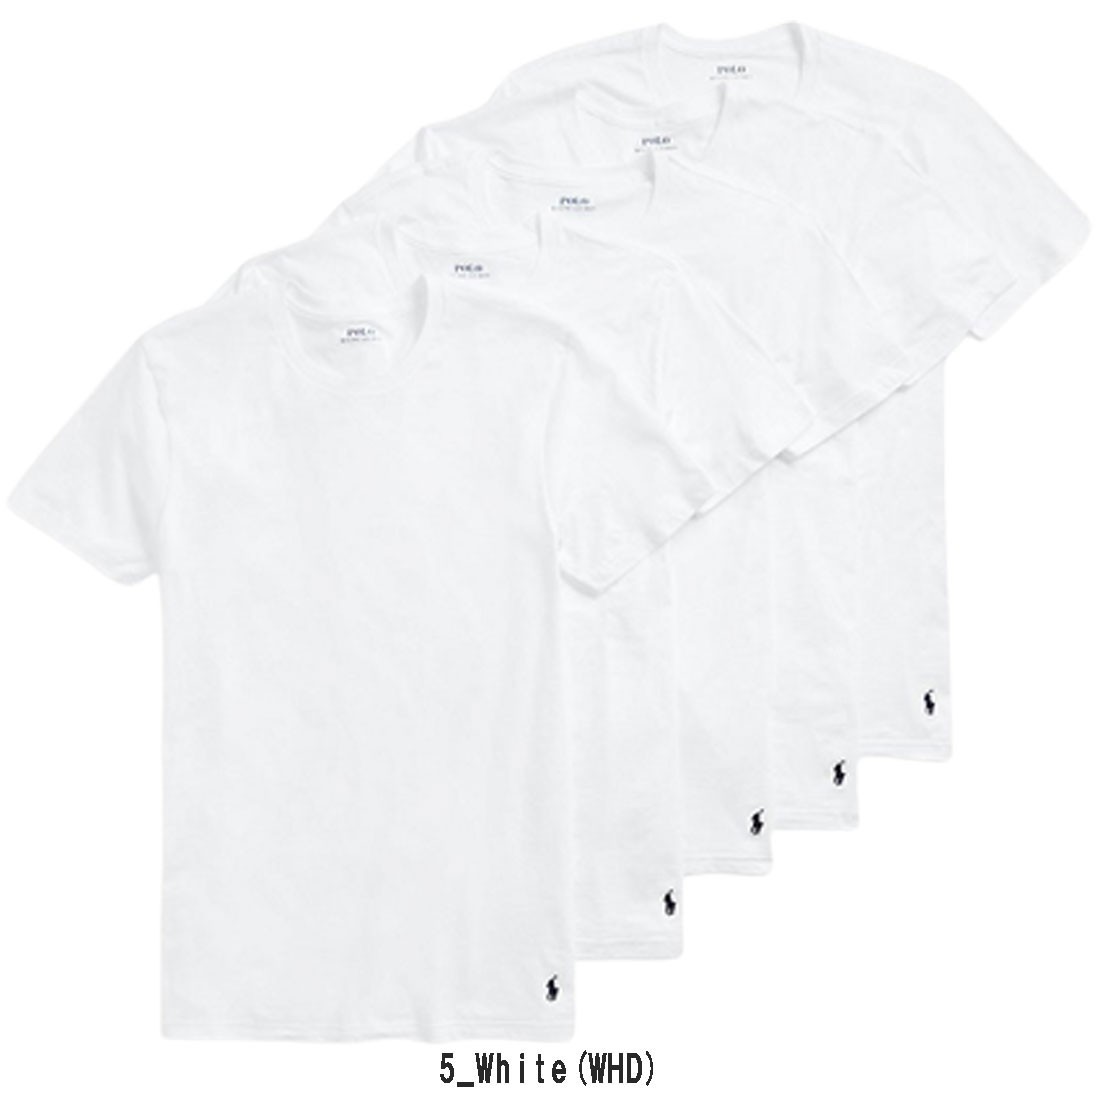 (SALE)POLO RALPH LAUREN(ポロ ラルフローレン)Tシャツ 5枚セット Cotton Classic Fit NCCNP5 5_White(WHD) M pr32-nccnp5-whd-m★2